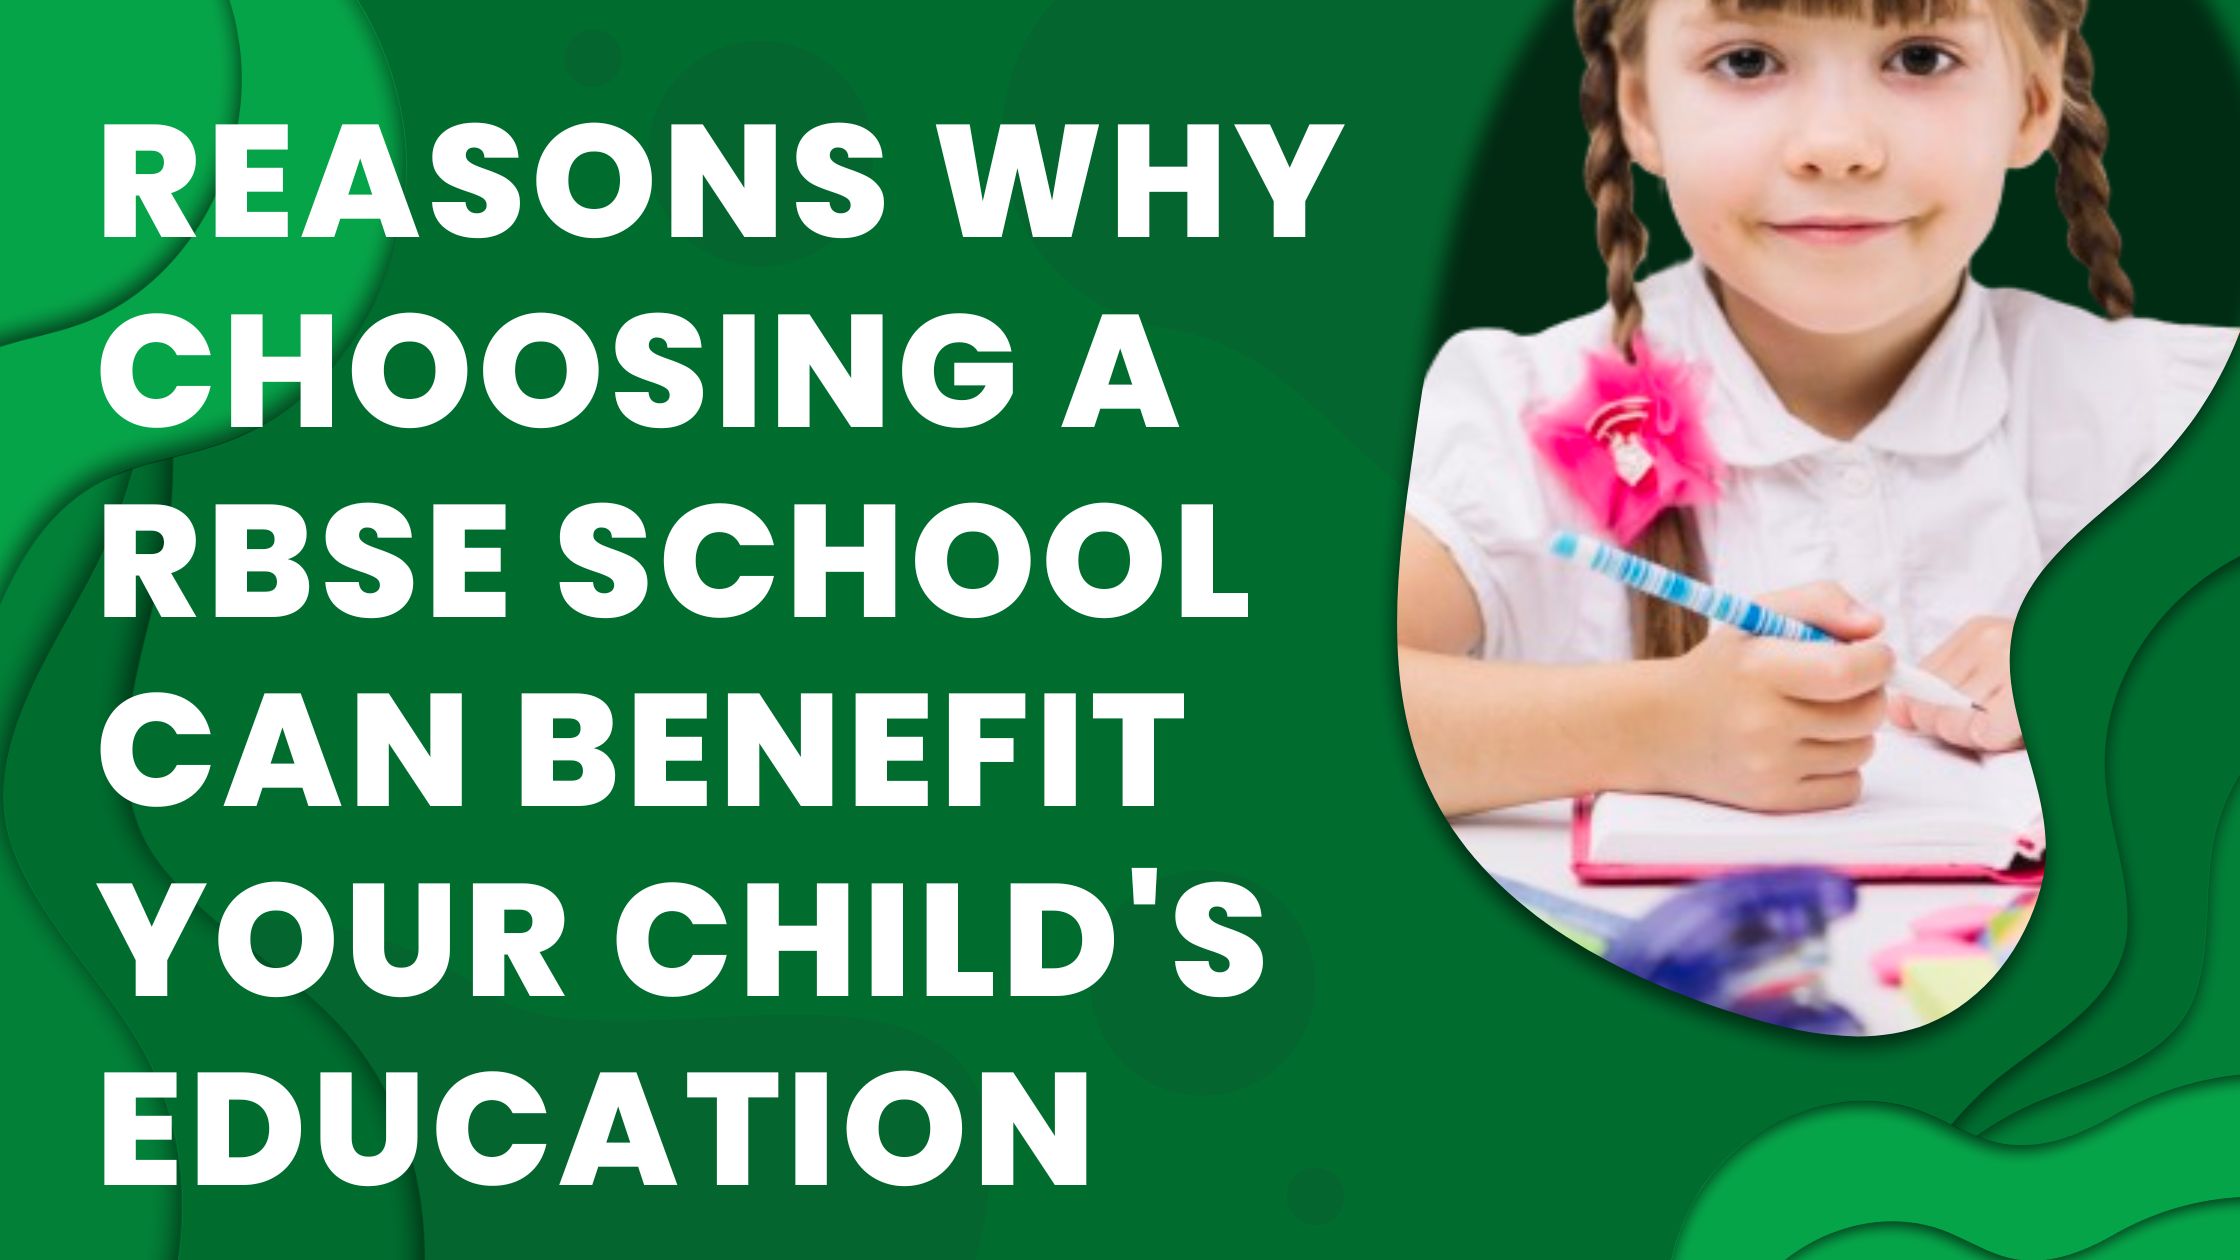 Reasons Why Choosing a RBSE School Can Benefit Your Child's Education